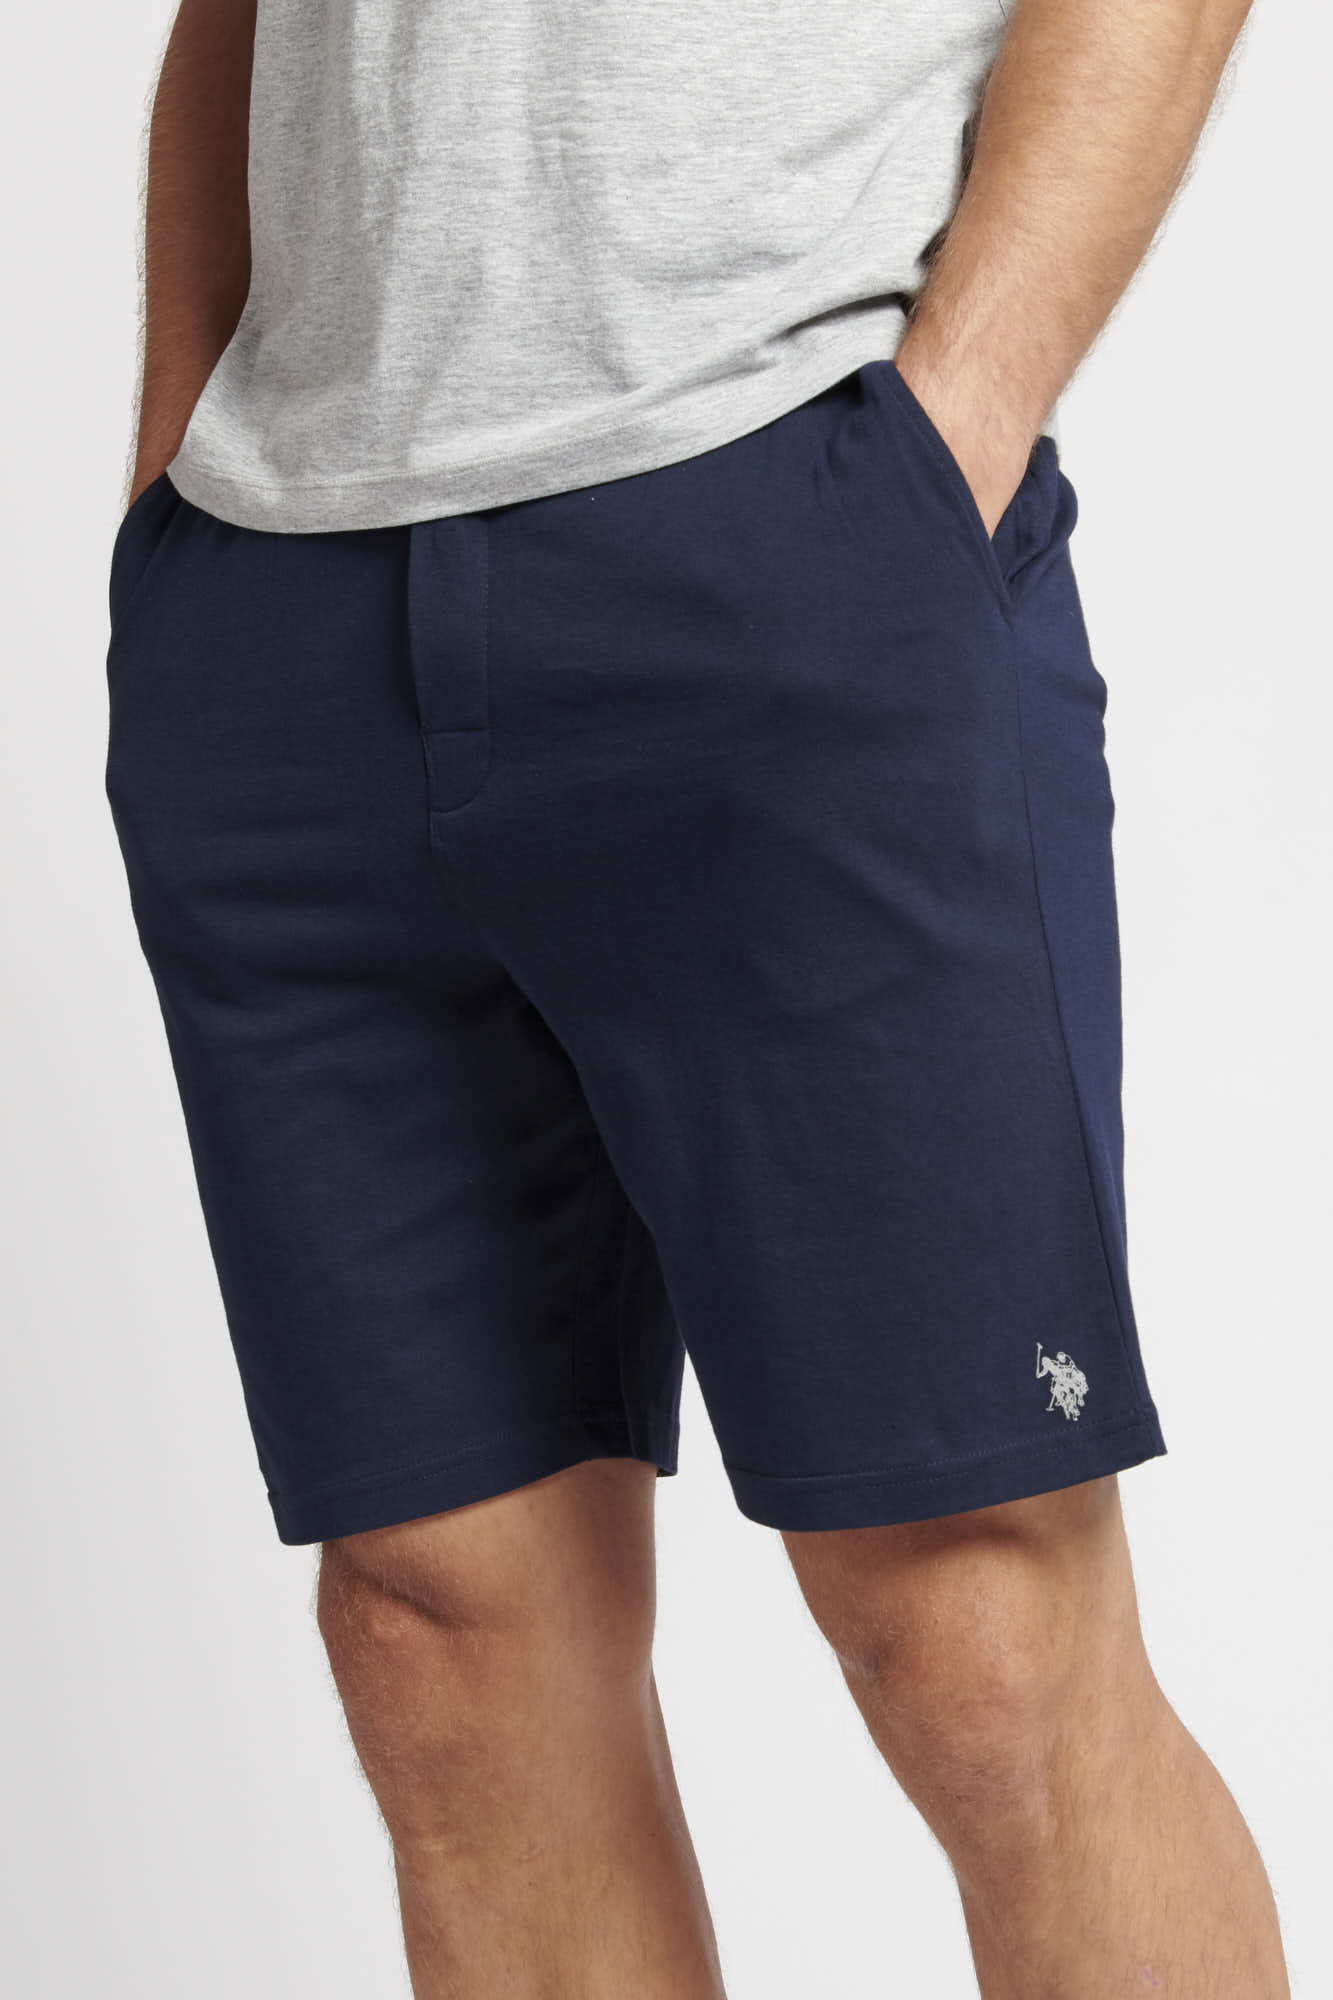 Mens Lounge Shorts in Navy Blue